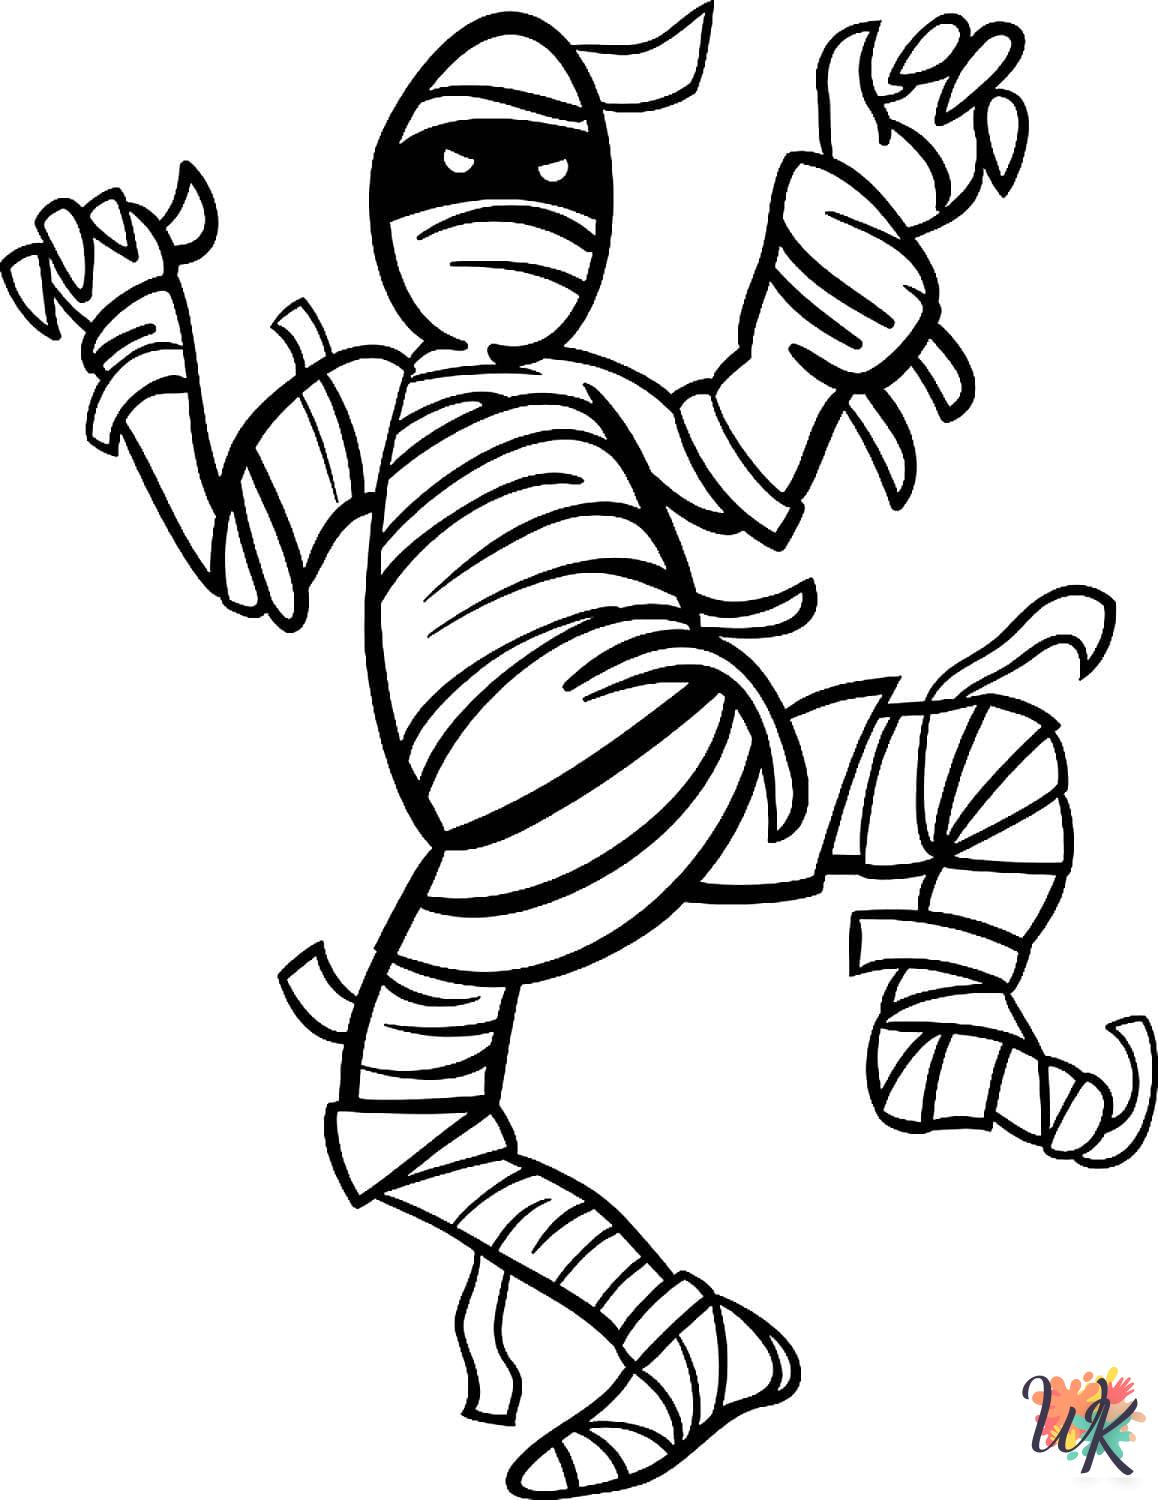 Mummy ornaments coloring pages